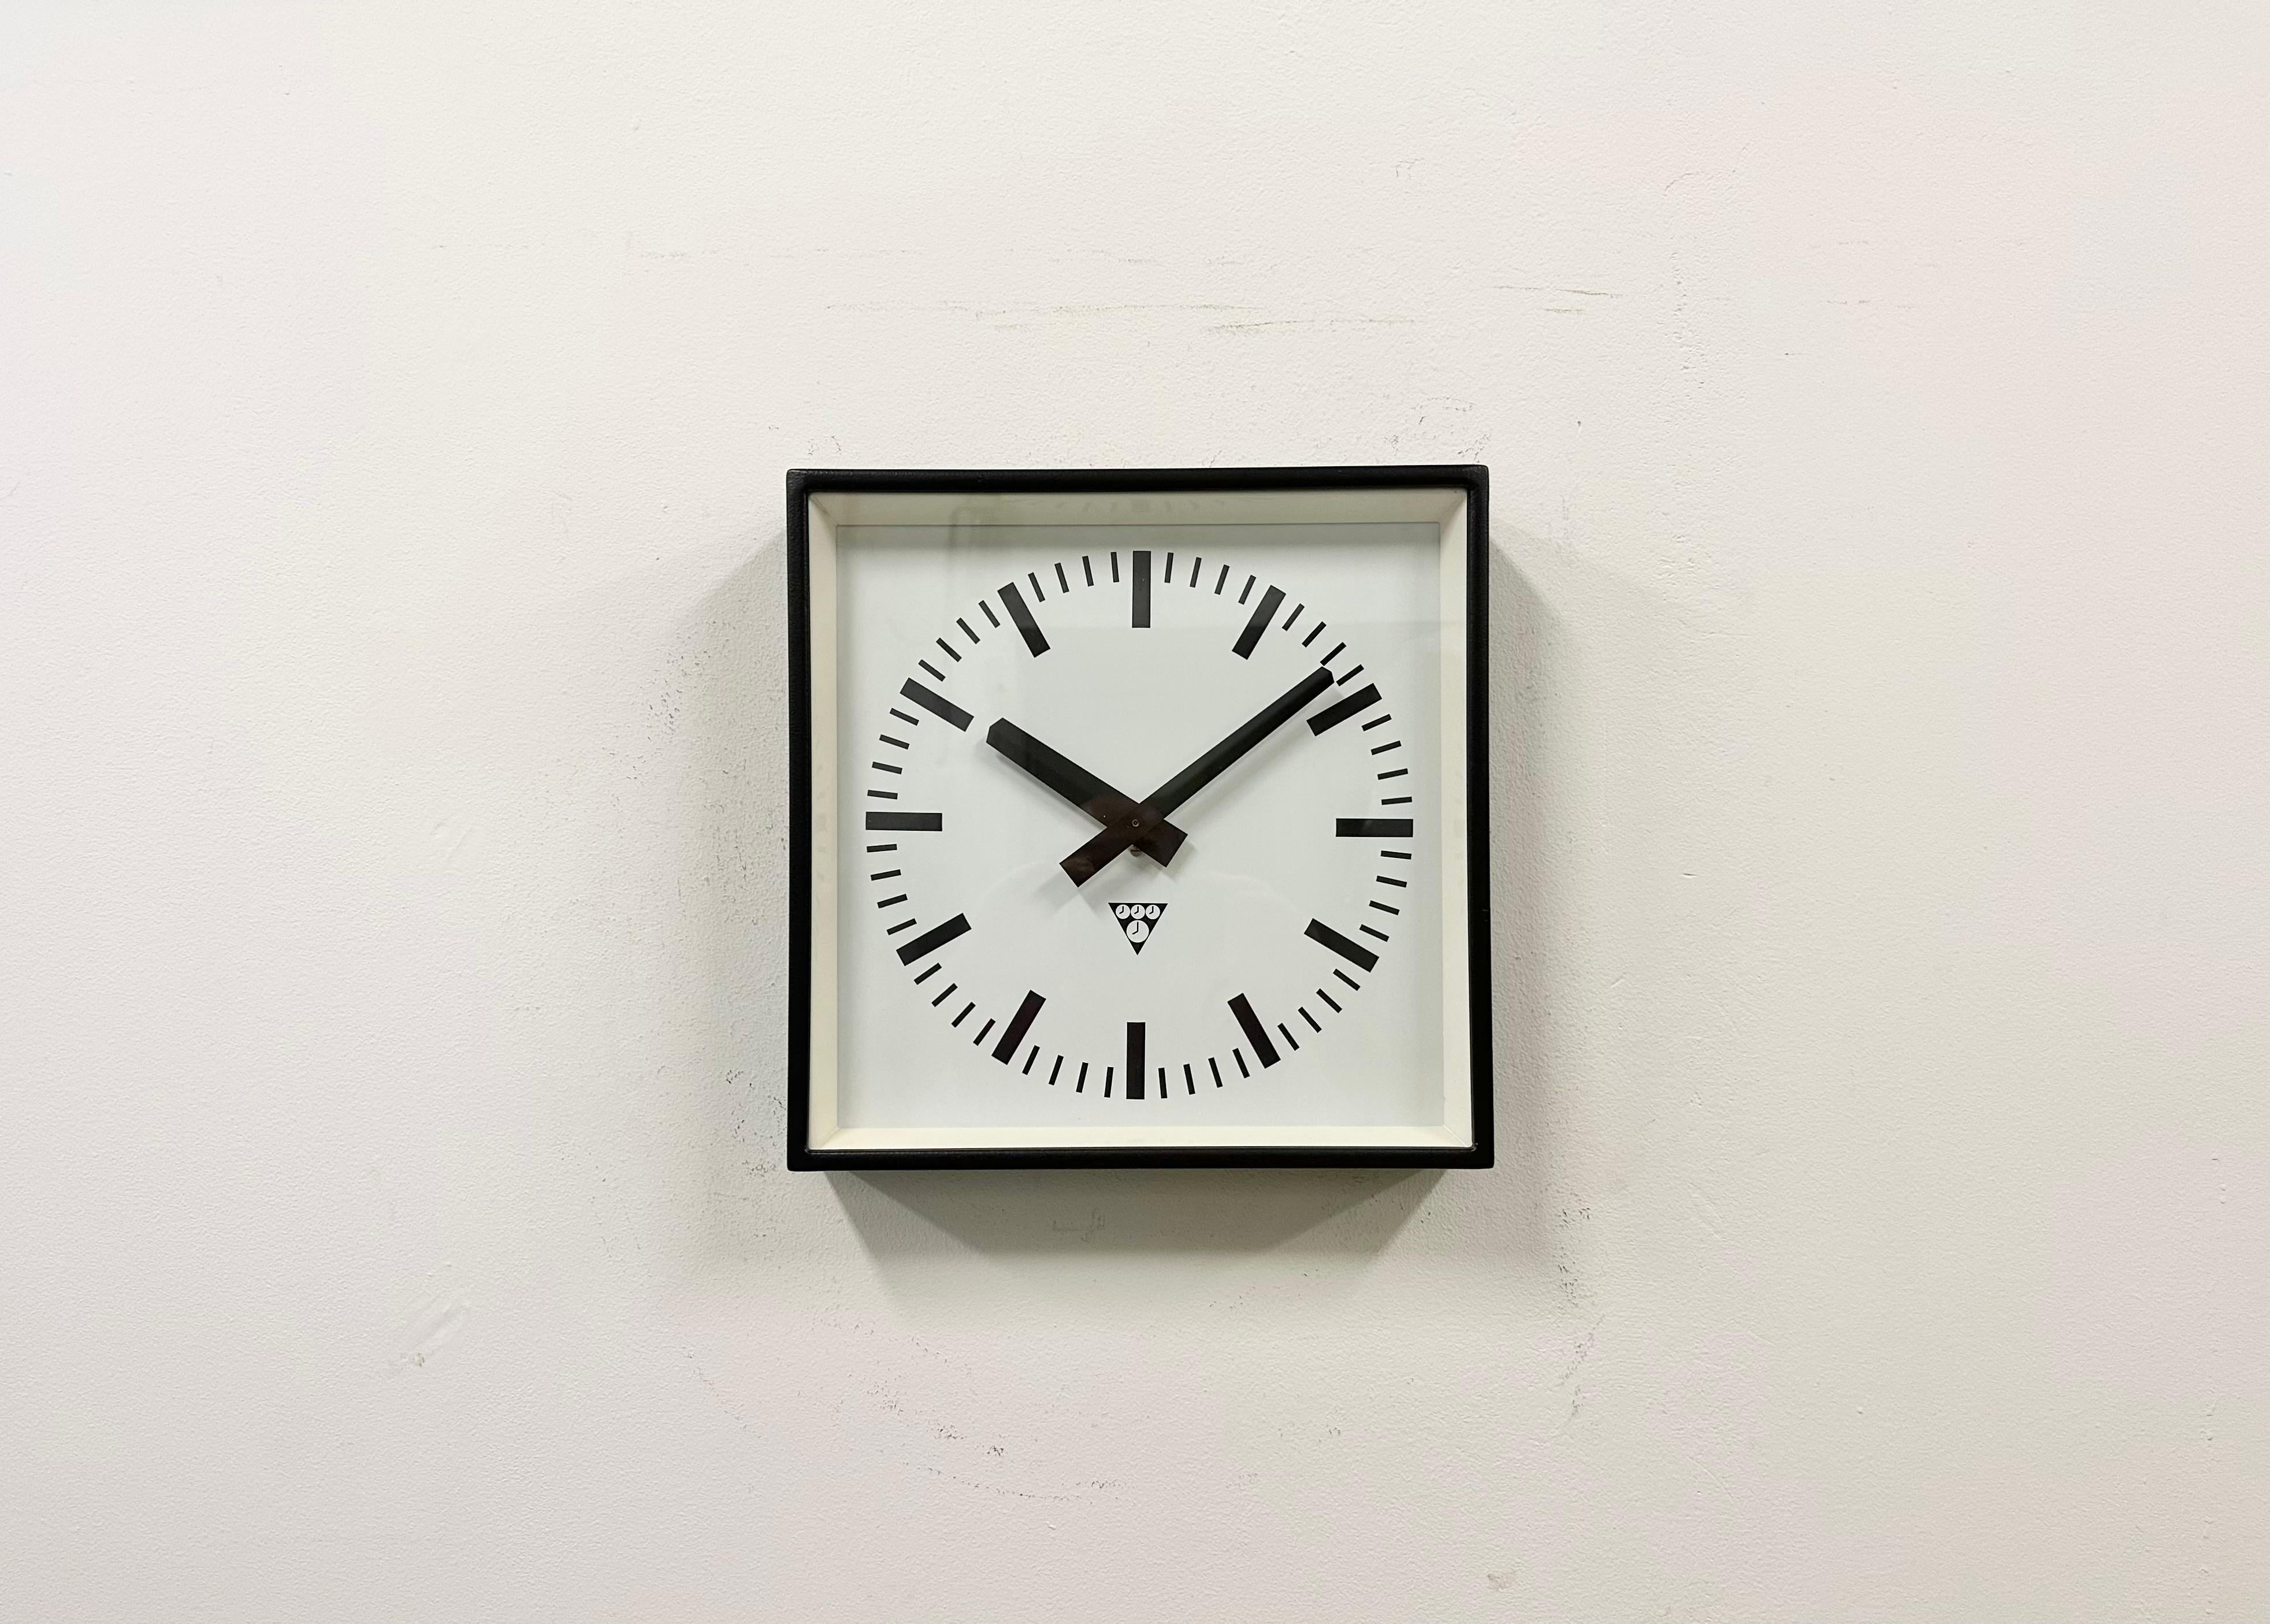 - Wall clock designed by Pragotron in former Czechoslovakia during the 1970s and made till 1990s
- Was used in factories, schools and railway stations 
- Newly black painted metal frame 
- Aluminium dial and hands 
- Clear glass cover 
- Former